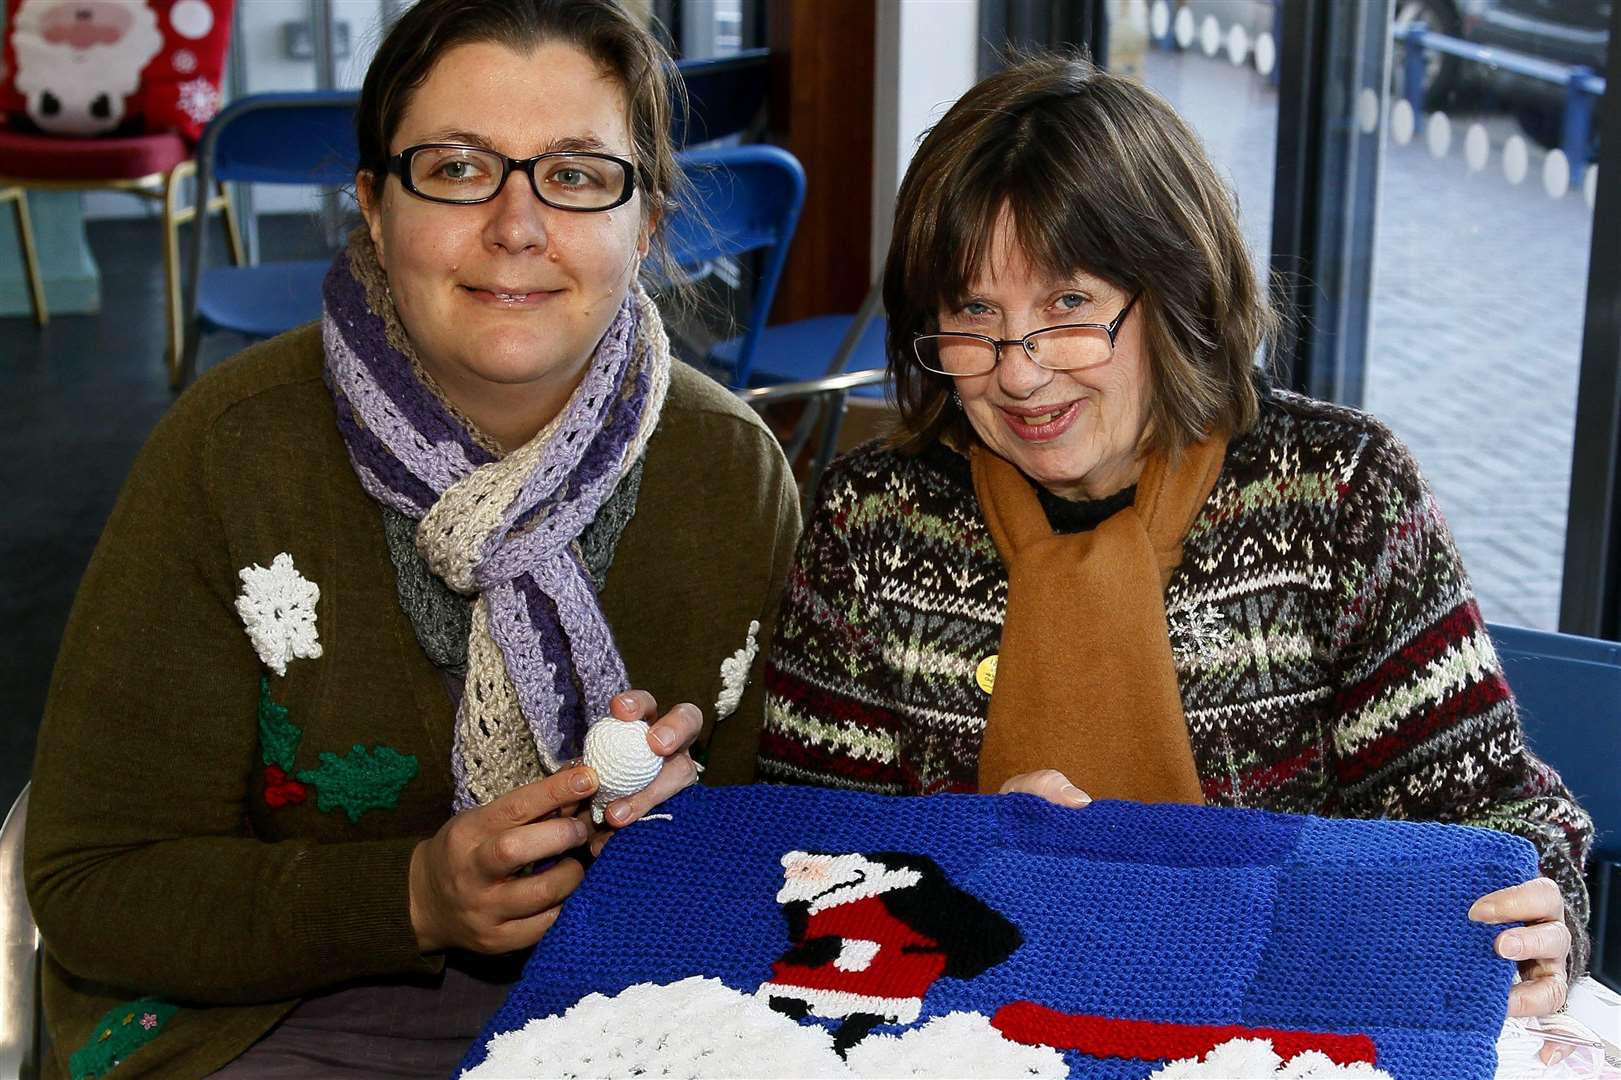 Sarah Childs and Susan Gower from Gravesham Urban Knitters at the Creative Christmas event